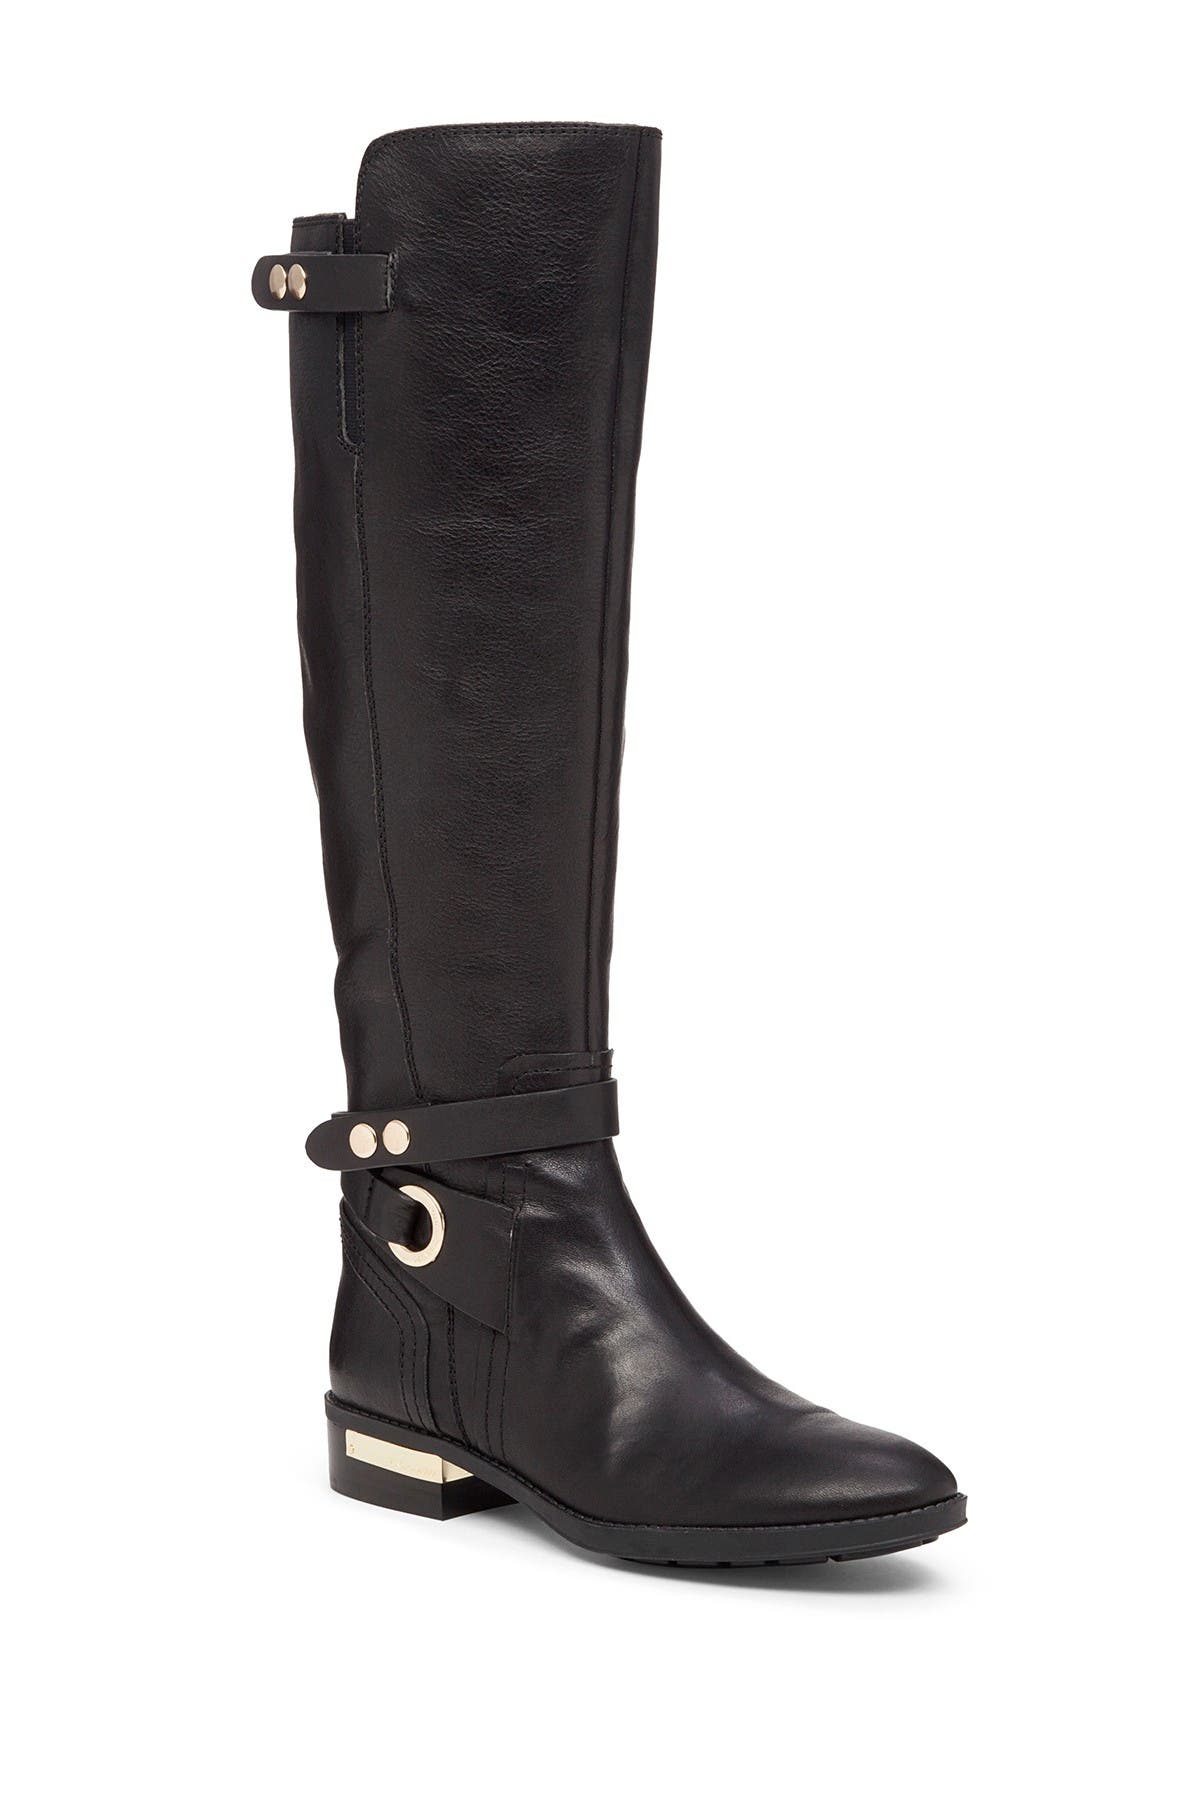 vince camuto leather riding boots